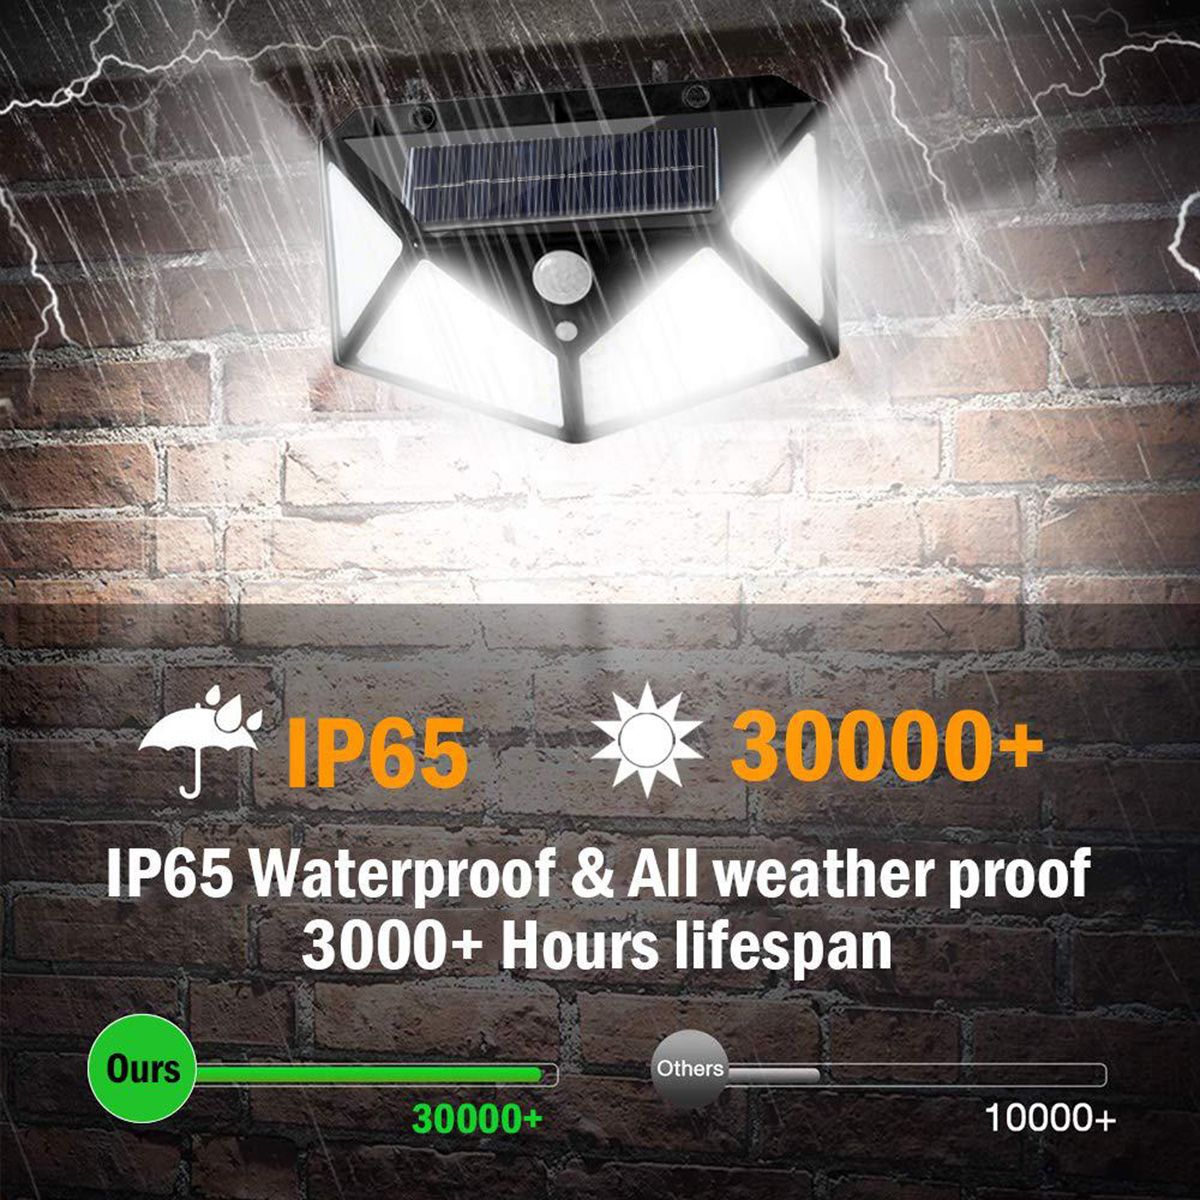 100LED-Solar-Motion-Sensor-Wall-Light-Outdoor-Garden-Lamp-Waterproof-Security-Lighting-for-Home-Path-1754953